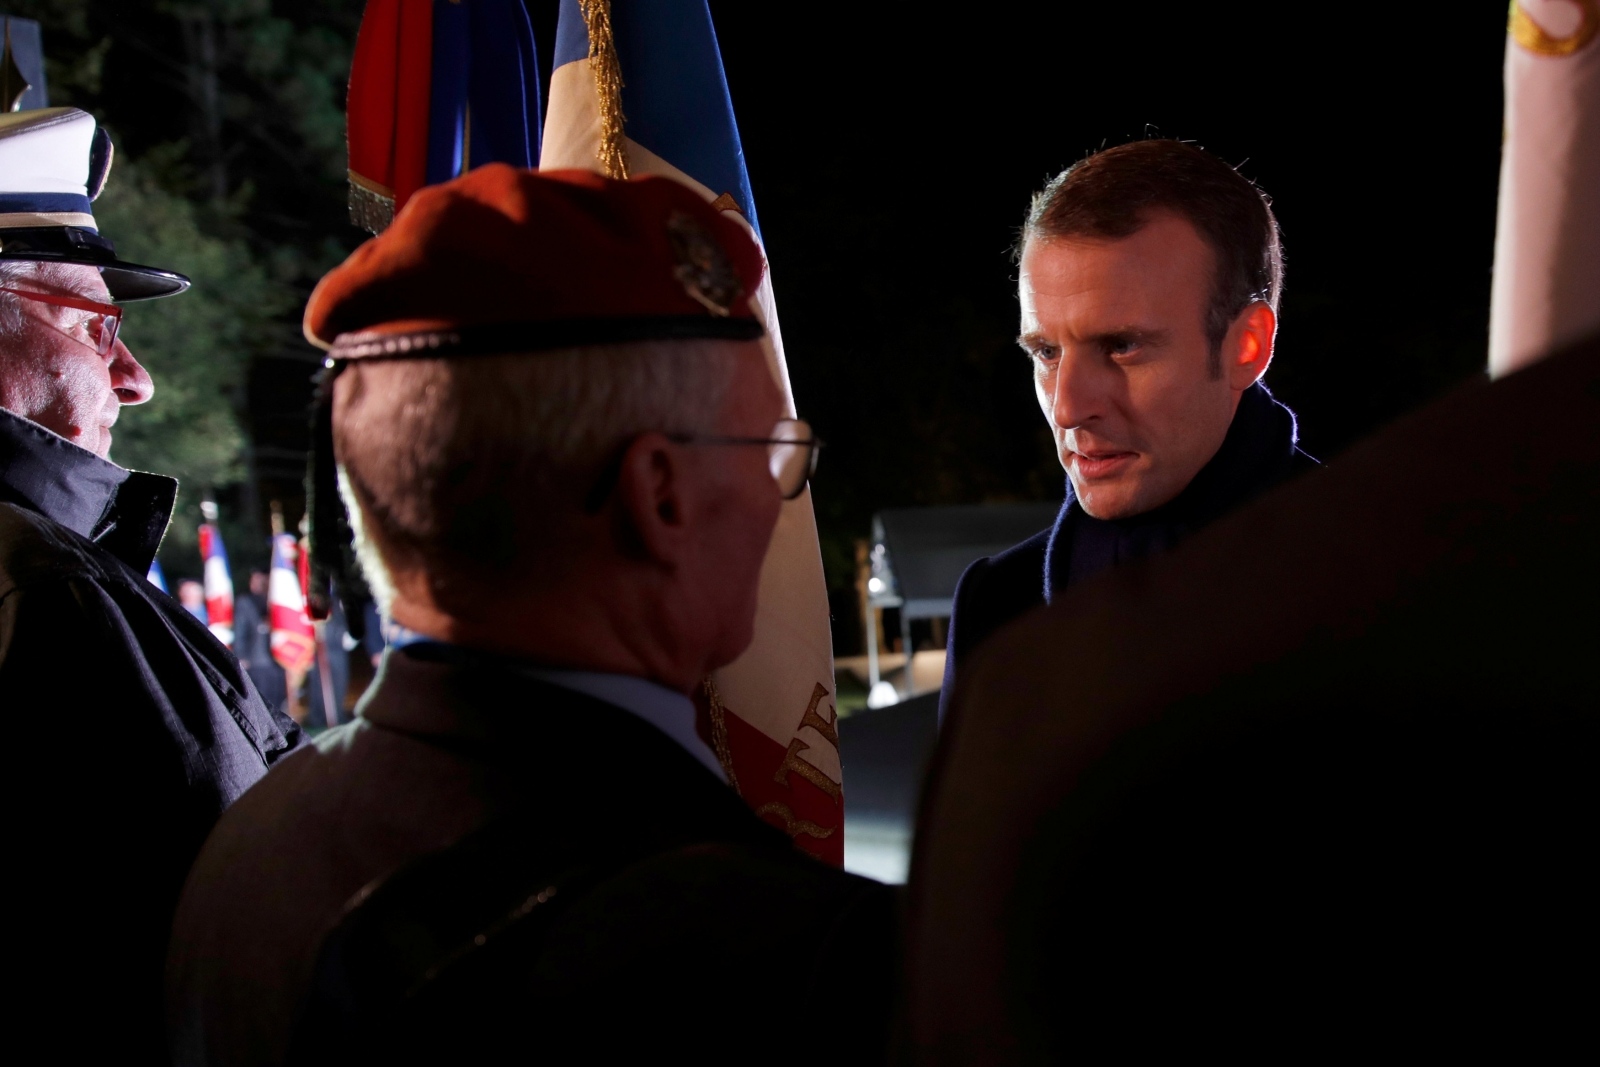 French President Emmanuel Macron attends a ceremony at the parc de Champagne in Reims French President Emmanuel Macron attends a ceremony at the parc de Champagne in Reims, Eastern France, November 6, 2018 as part of a World War One commemoration tour. REUTERS/Philippe Wojazer/Pool PHILIPPE WOJAZER